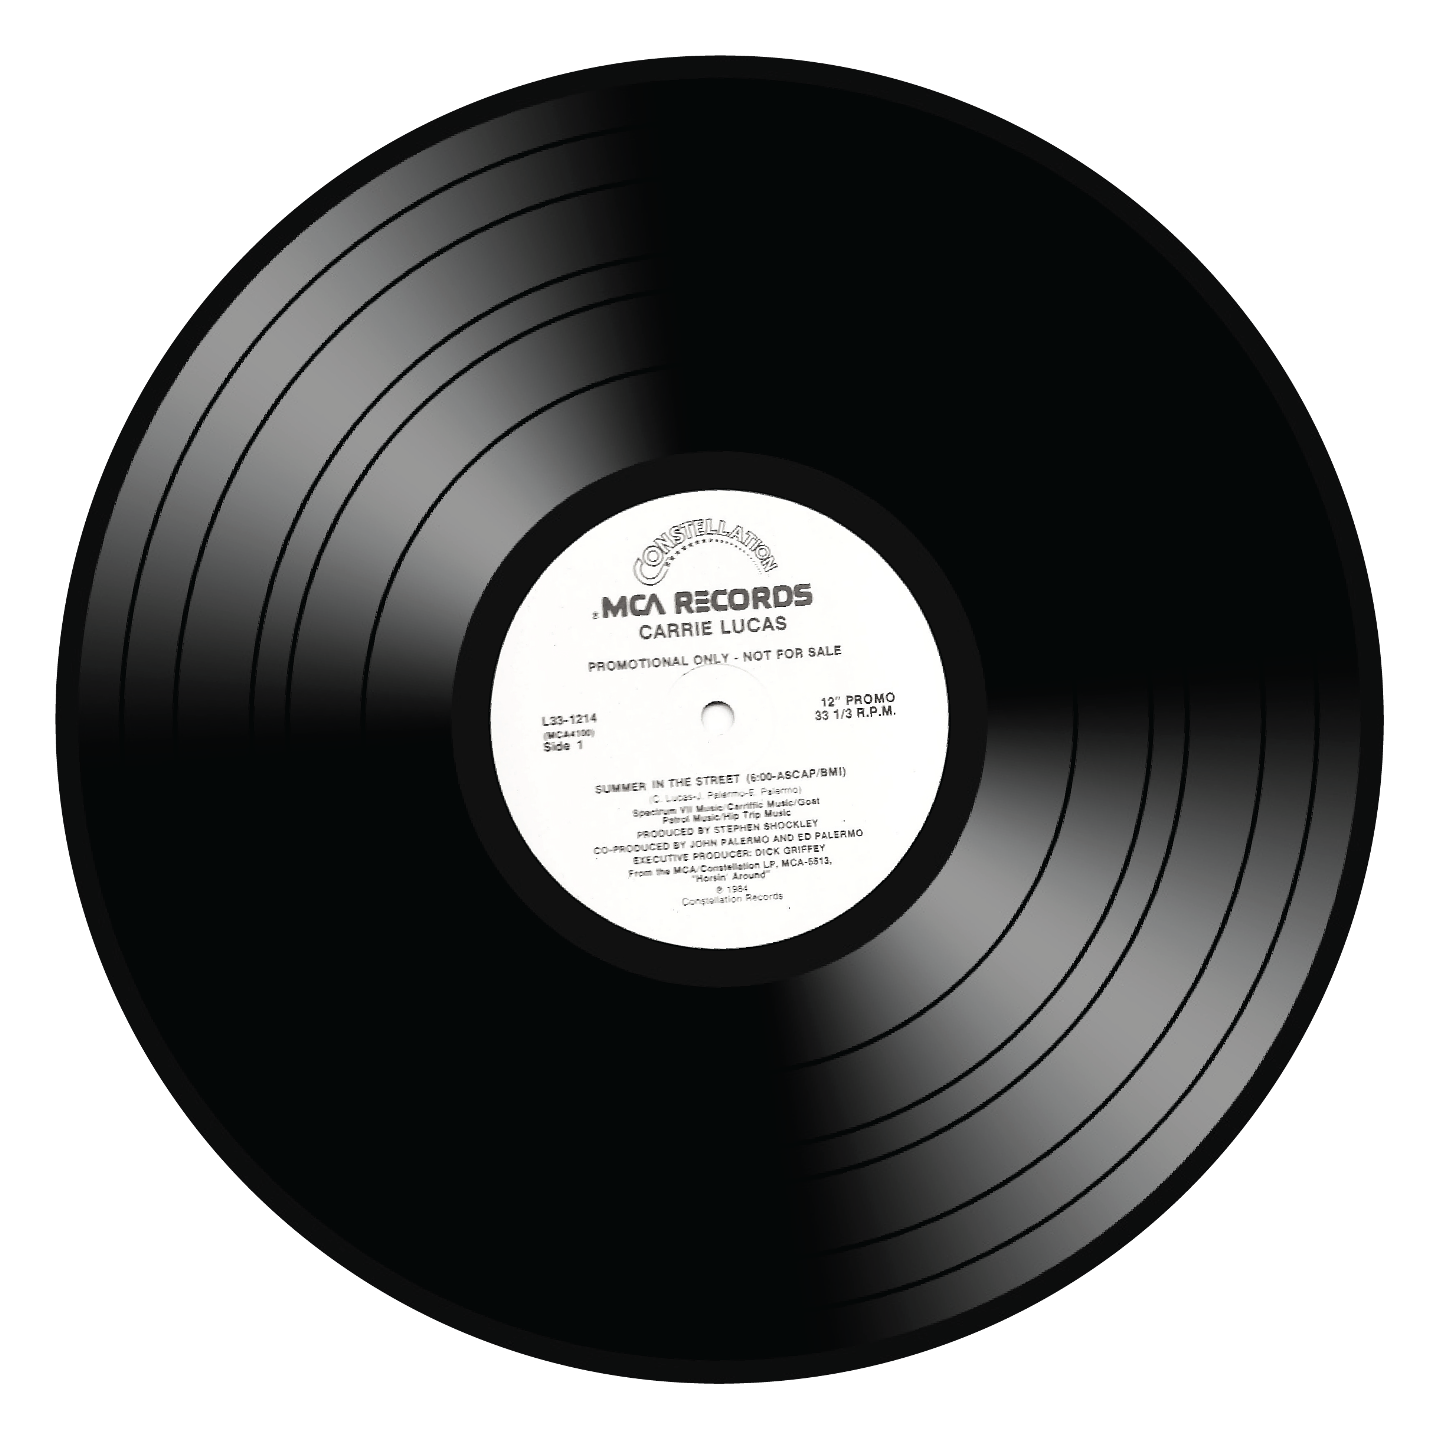 Vinyl Record Png Resolution512x512 Transparent Png Image Imgspng ...